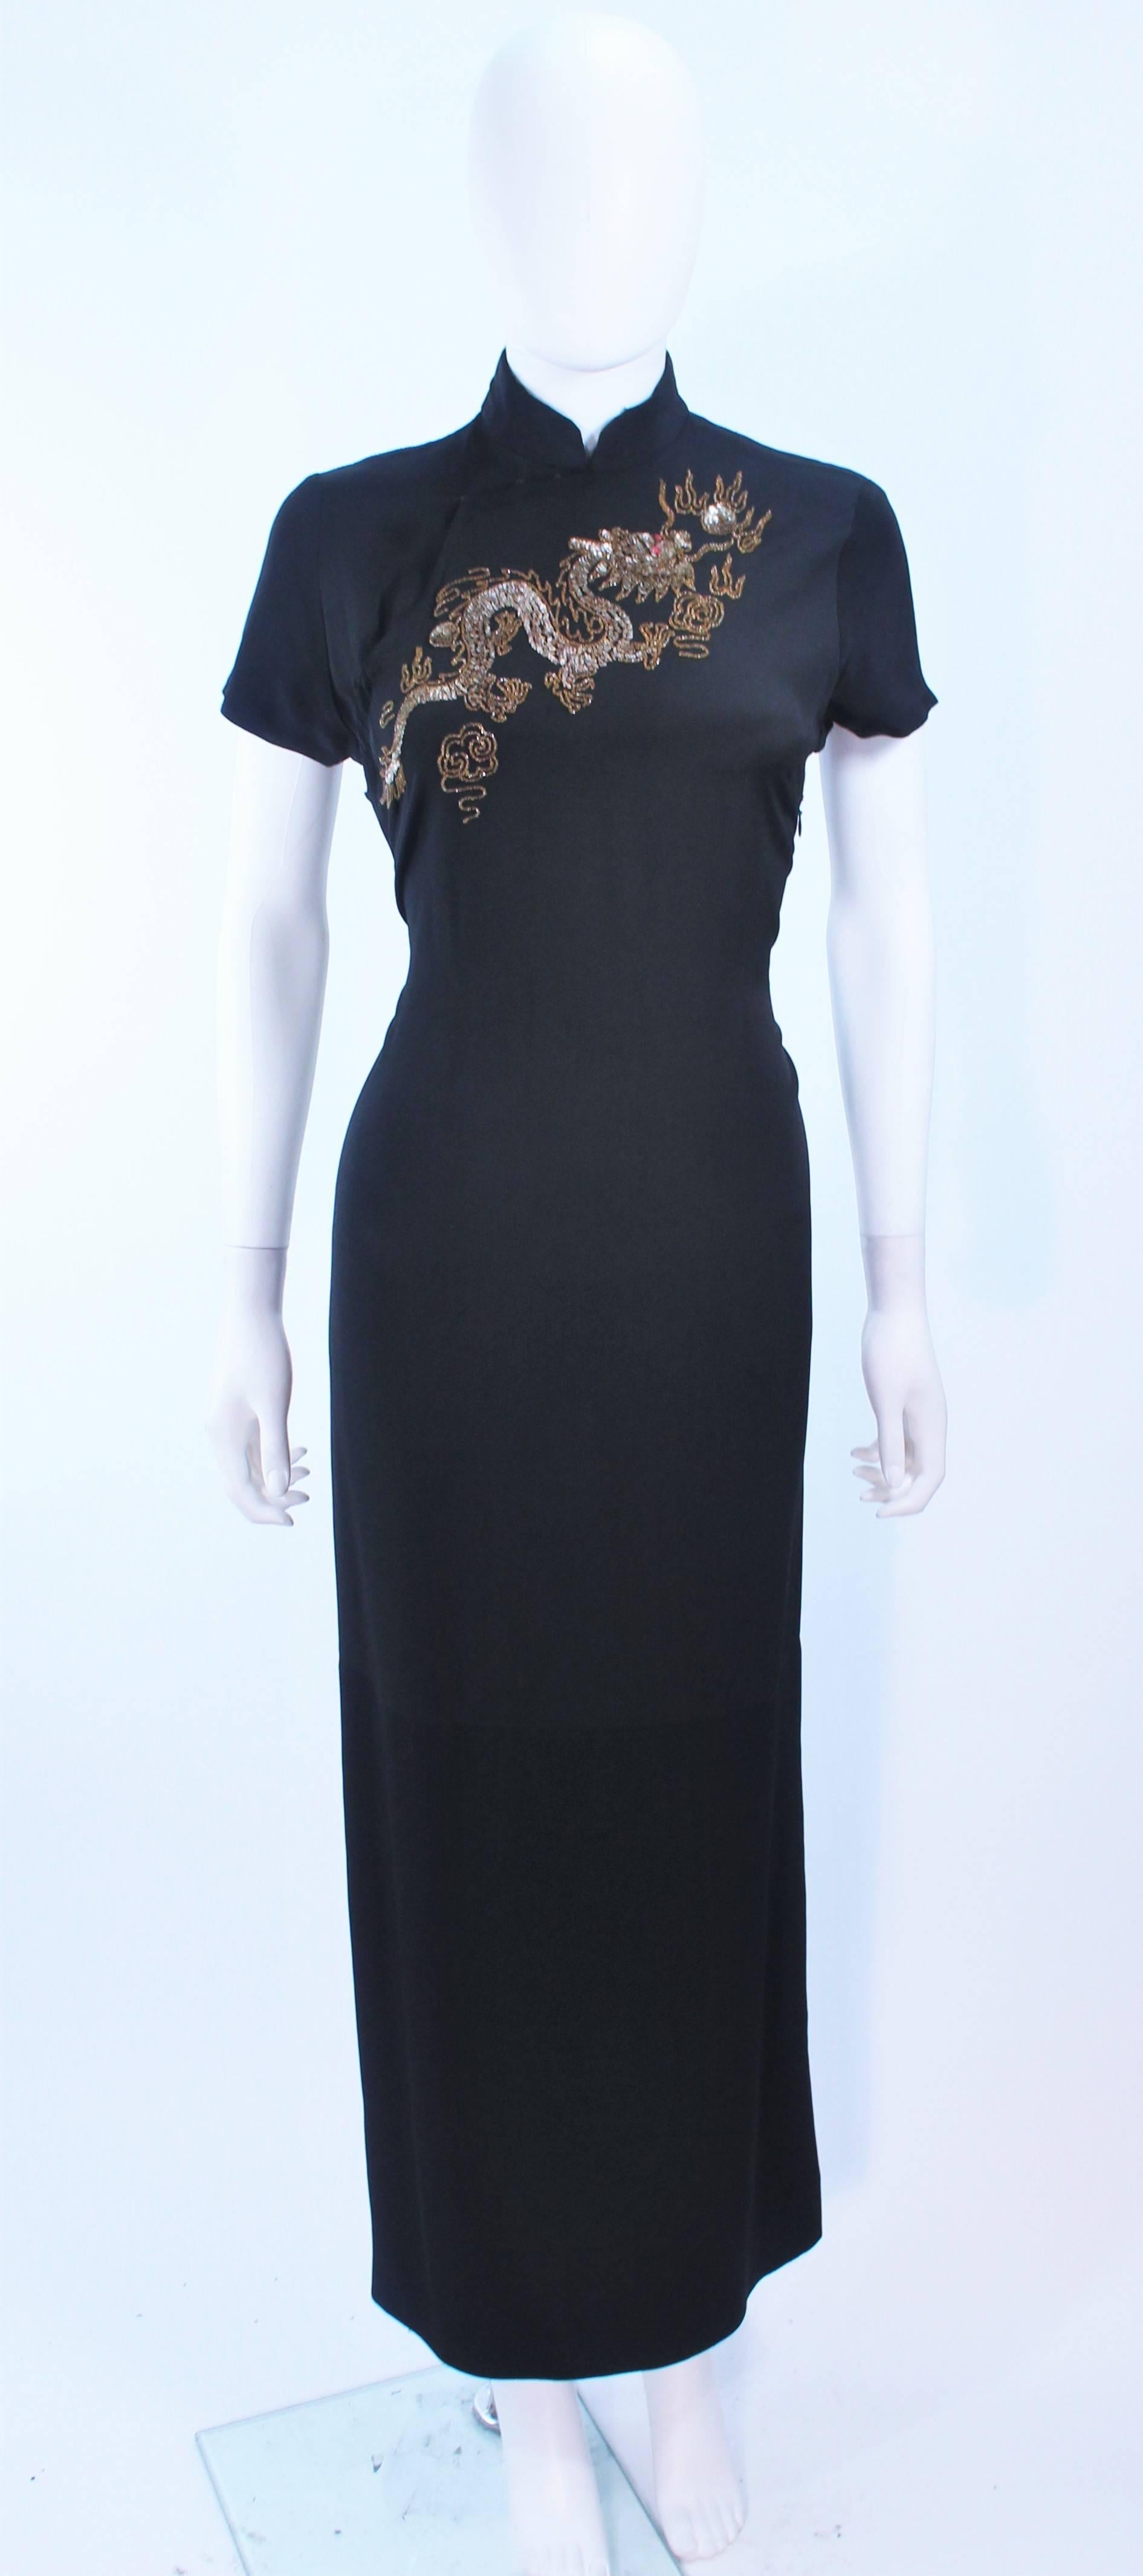 This vintage design is composed of a black silk and features a beaded dragon embellishment on the center front. Features a mandarin style collar with snaps and a side zipper closure. In excellent vintage condition.

**Please cross-reference